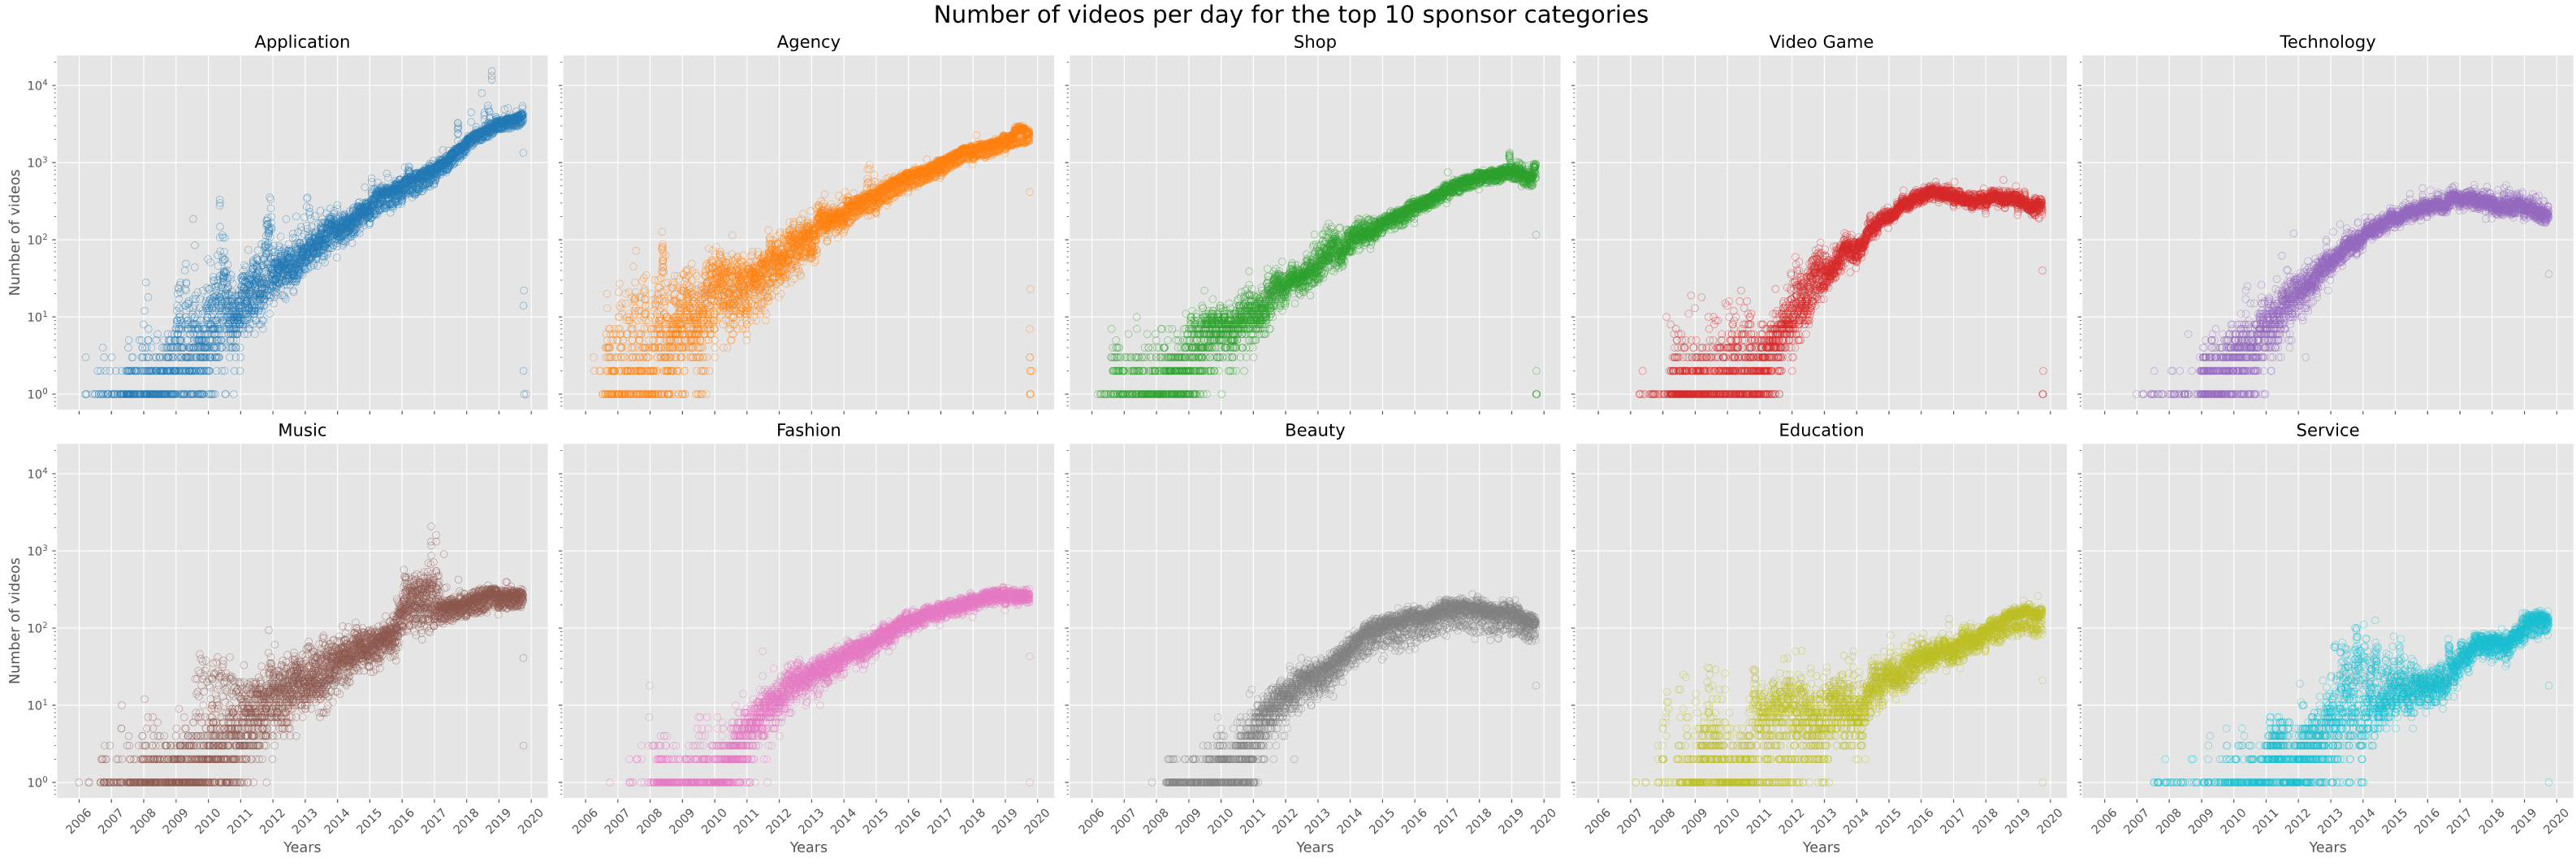 Scatter plot of number of videos per day for the top 10 sponsor categories